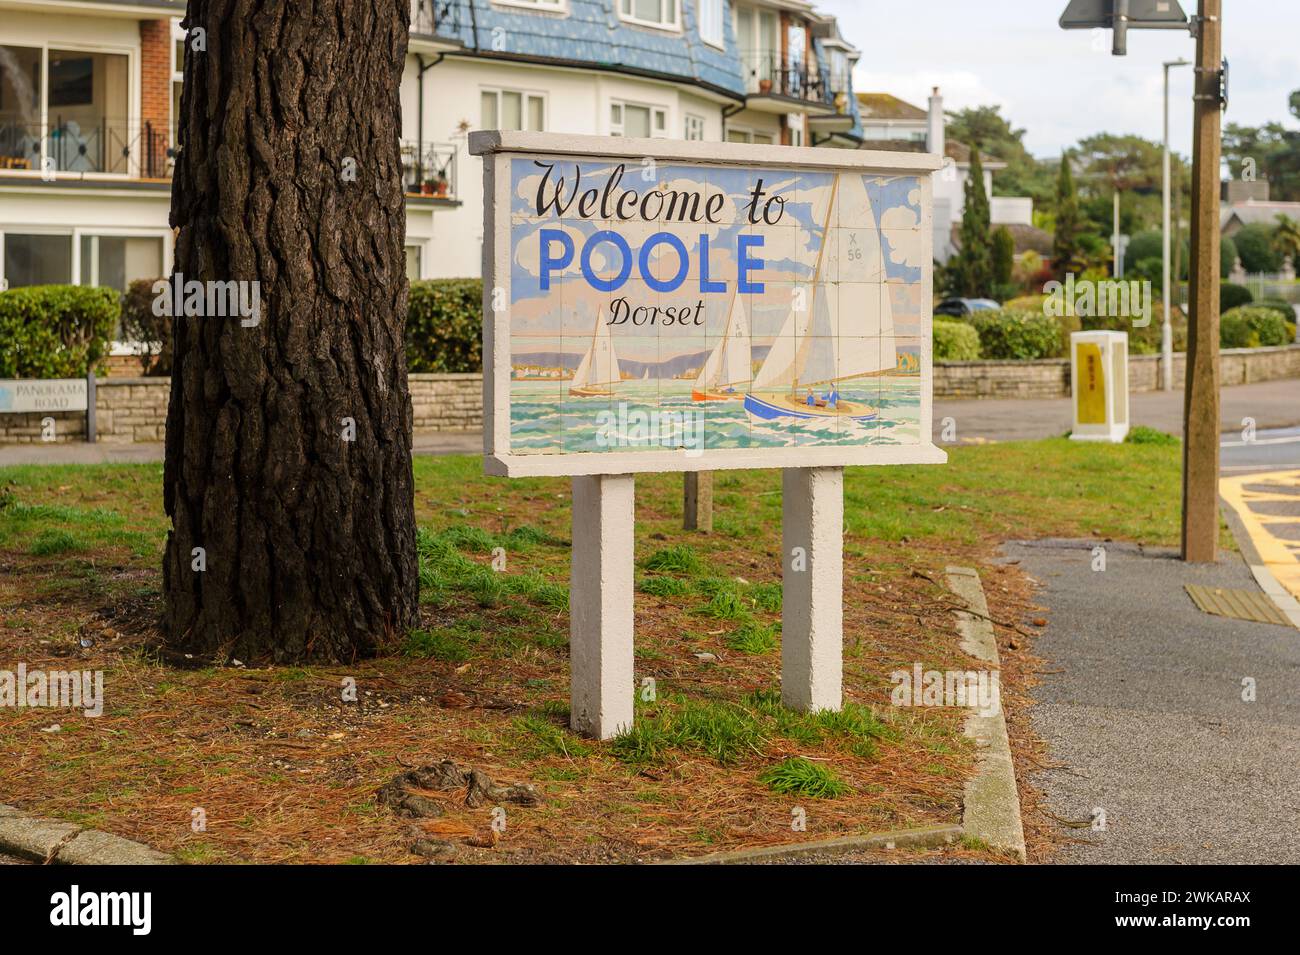 A Welcome to Poole sign, Poole, Dorset, England Stock Photo